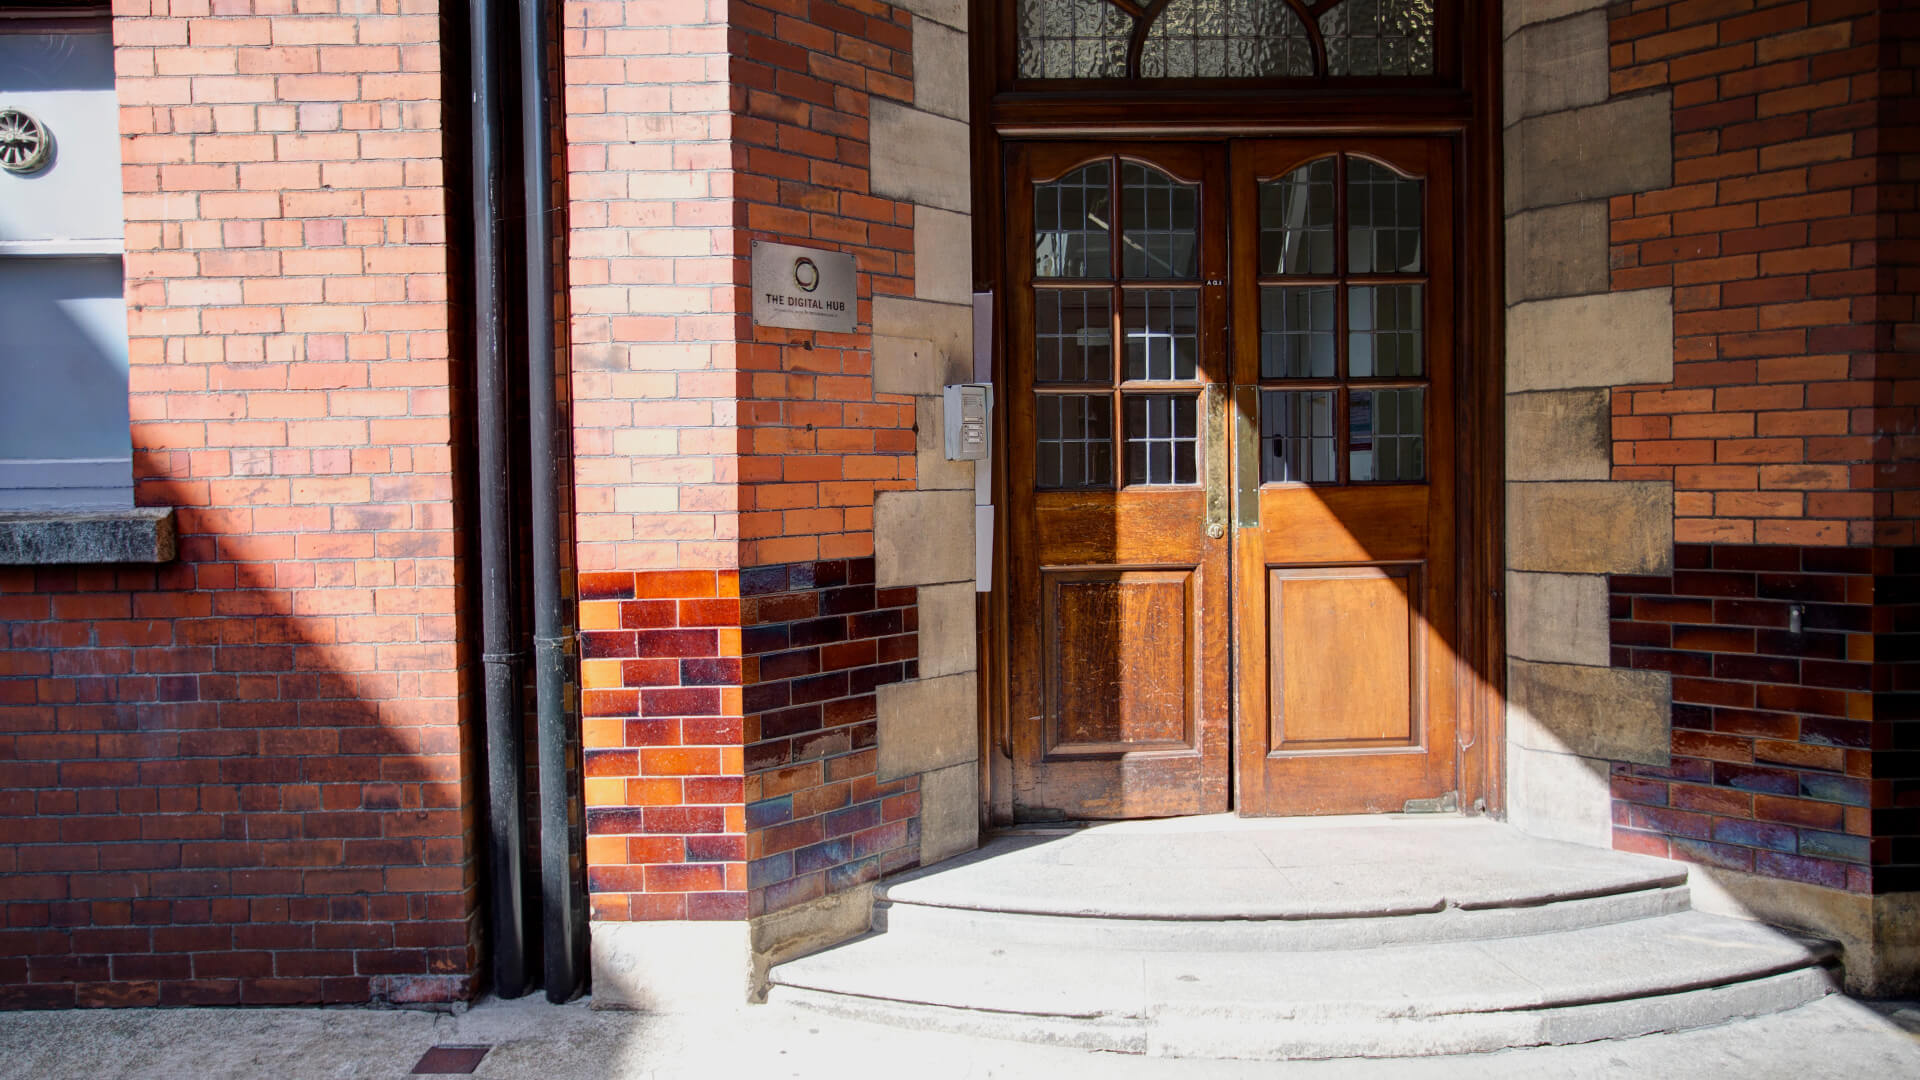 Semi-circular steps lead to the ornate wooden doors of 10-13 Thomas Street